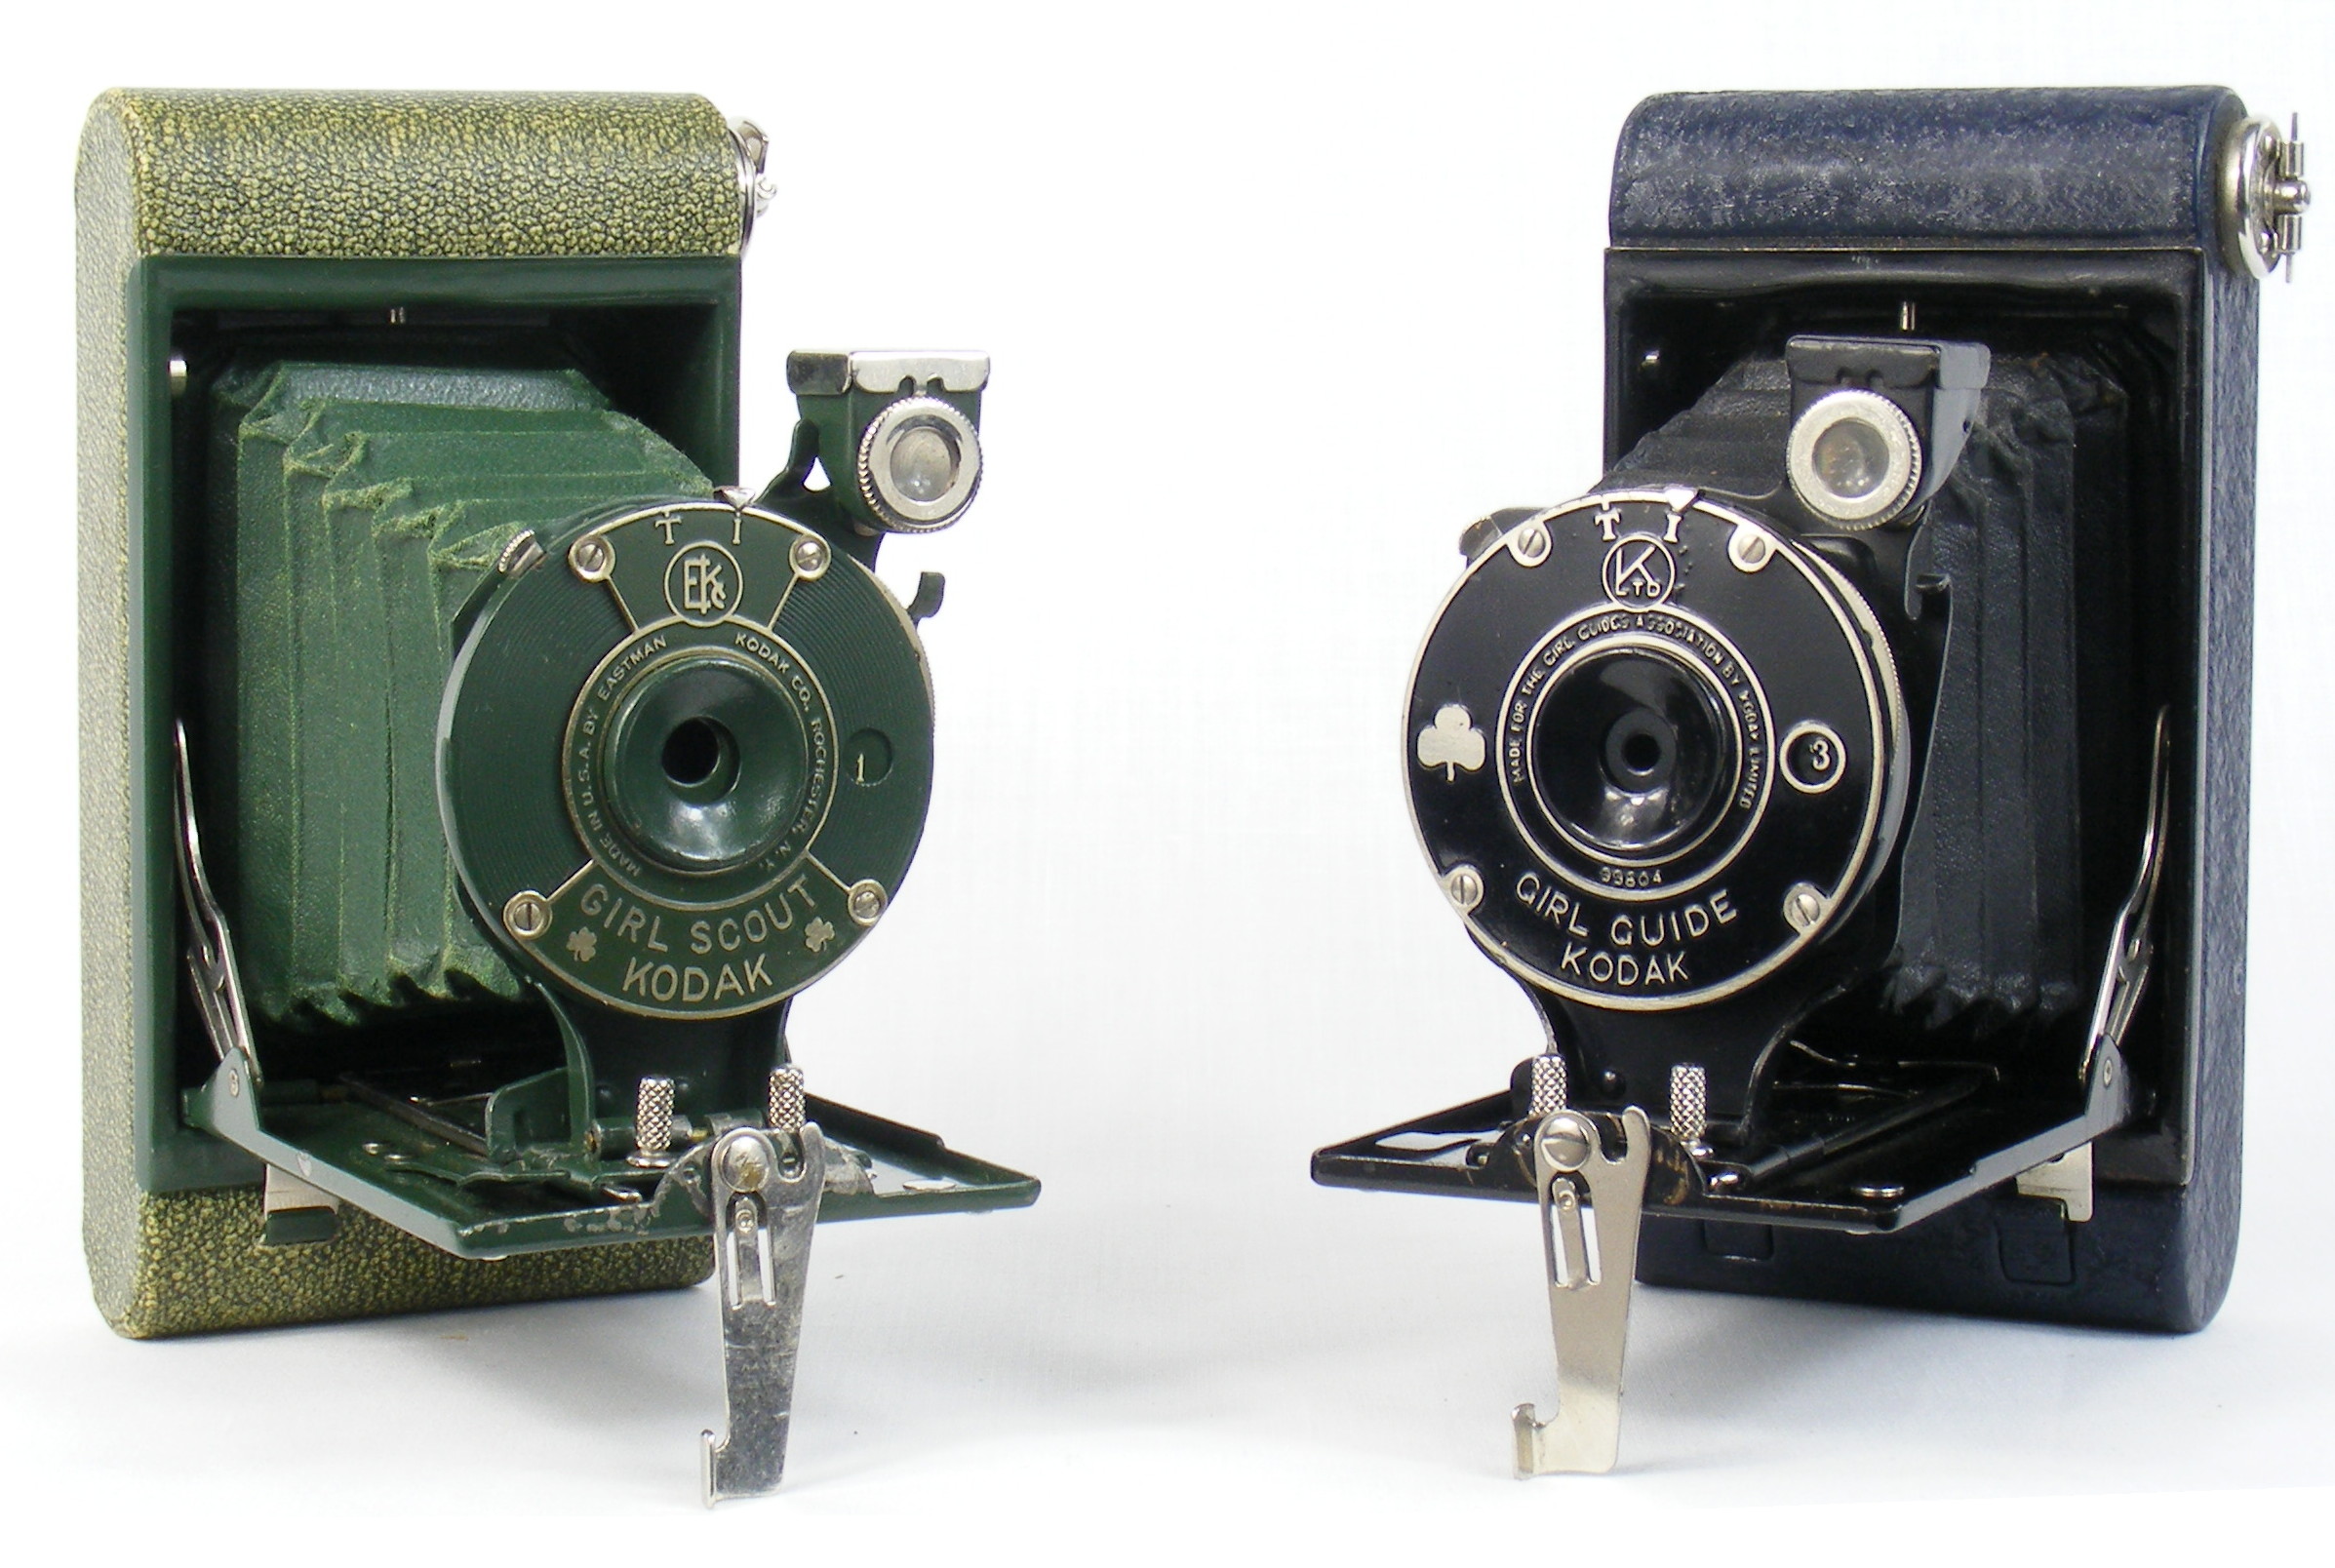 Image of Girl Scout and Girl Guide Kodak cameras (US and UK versions)